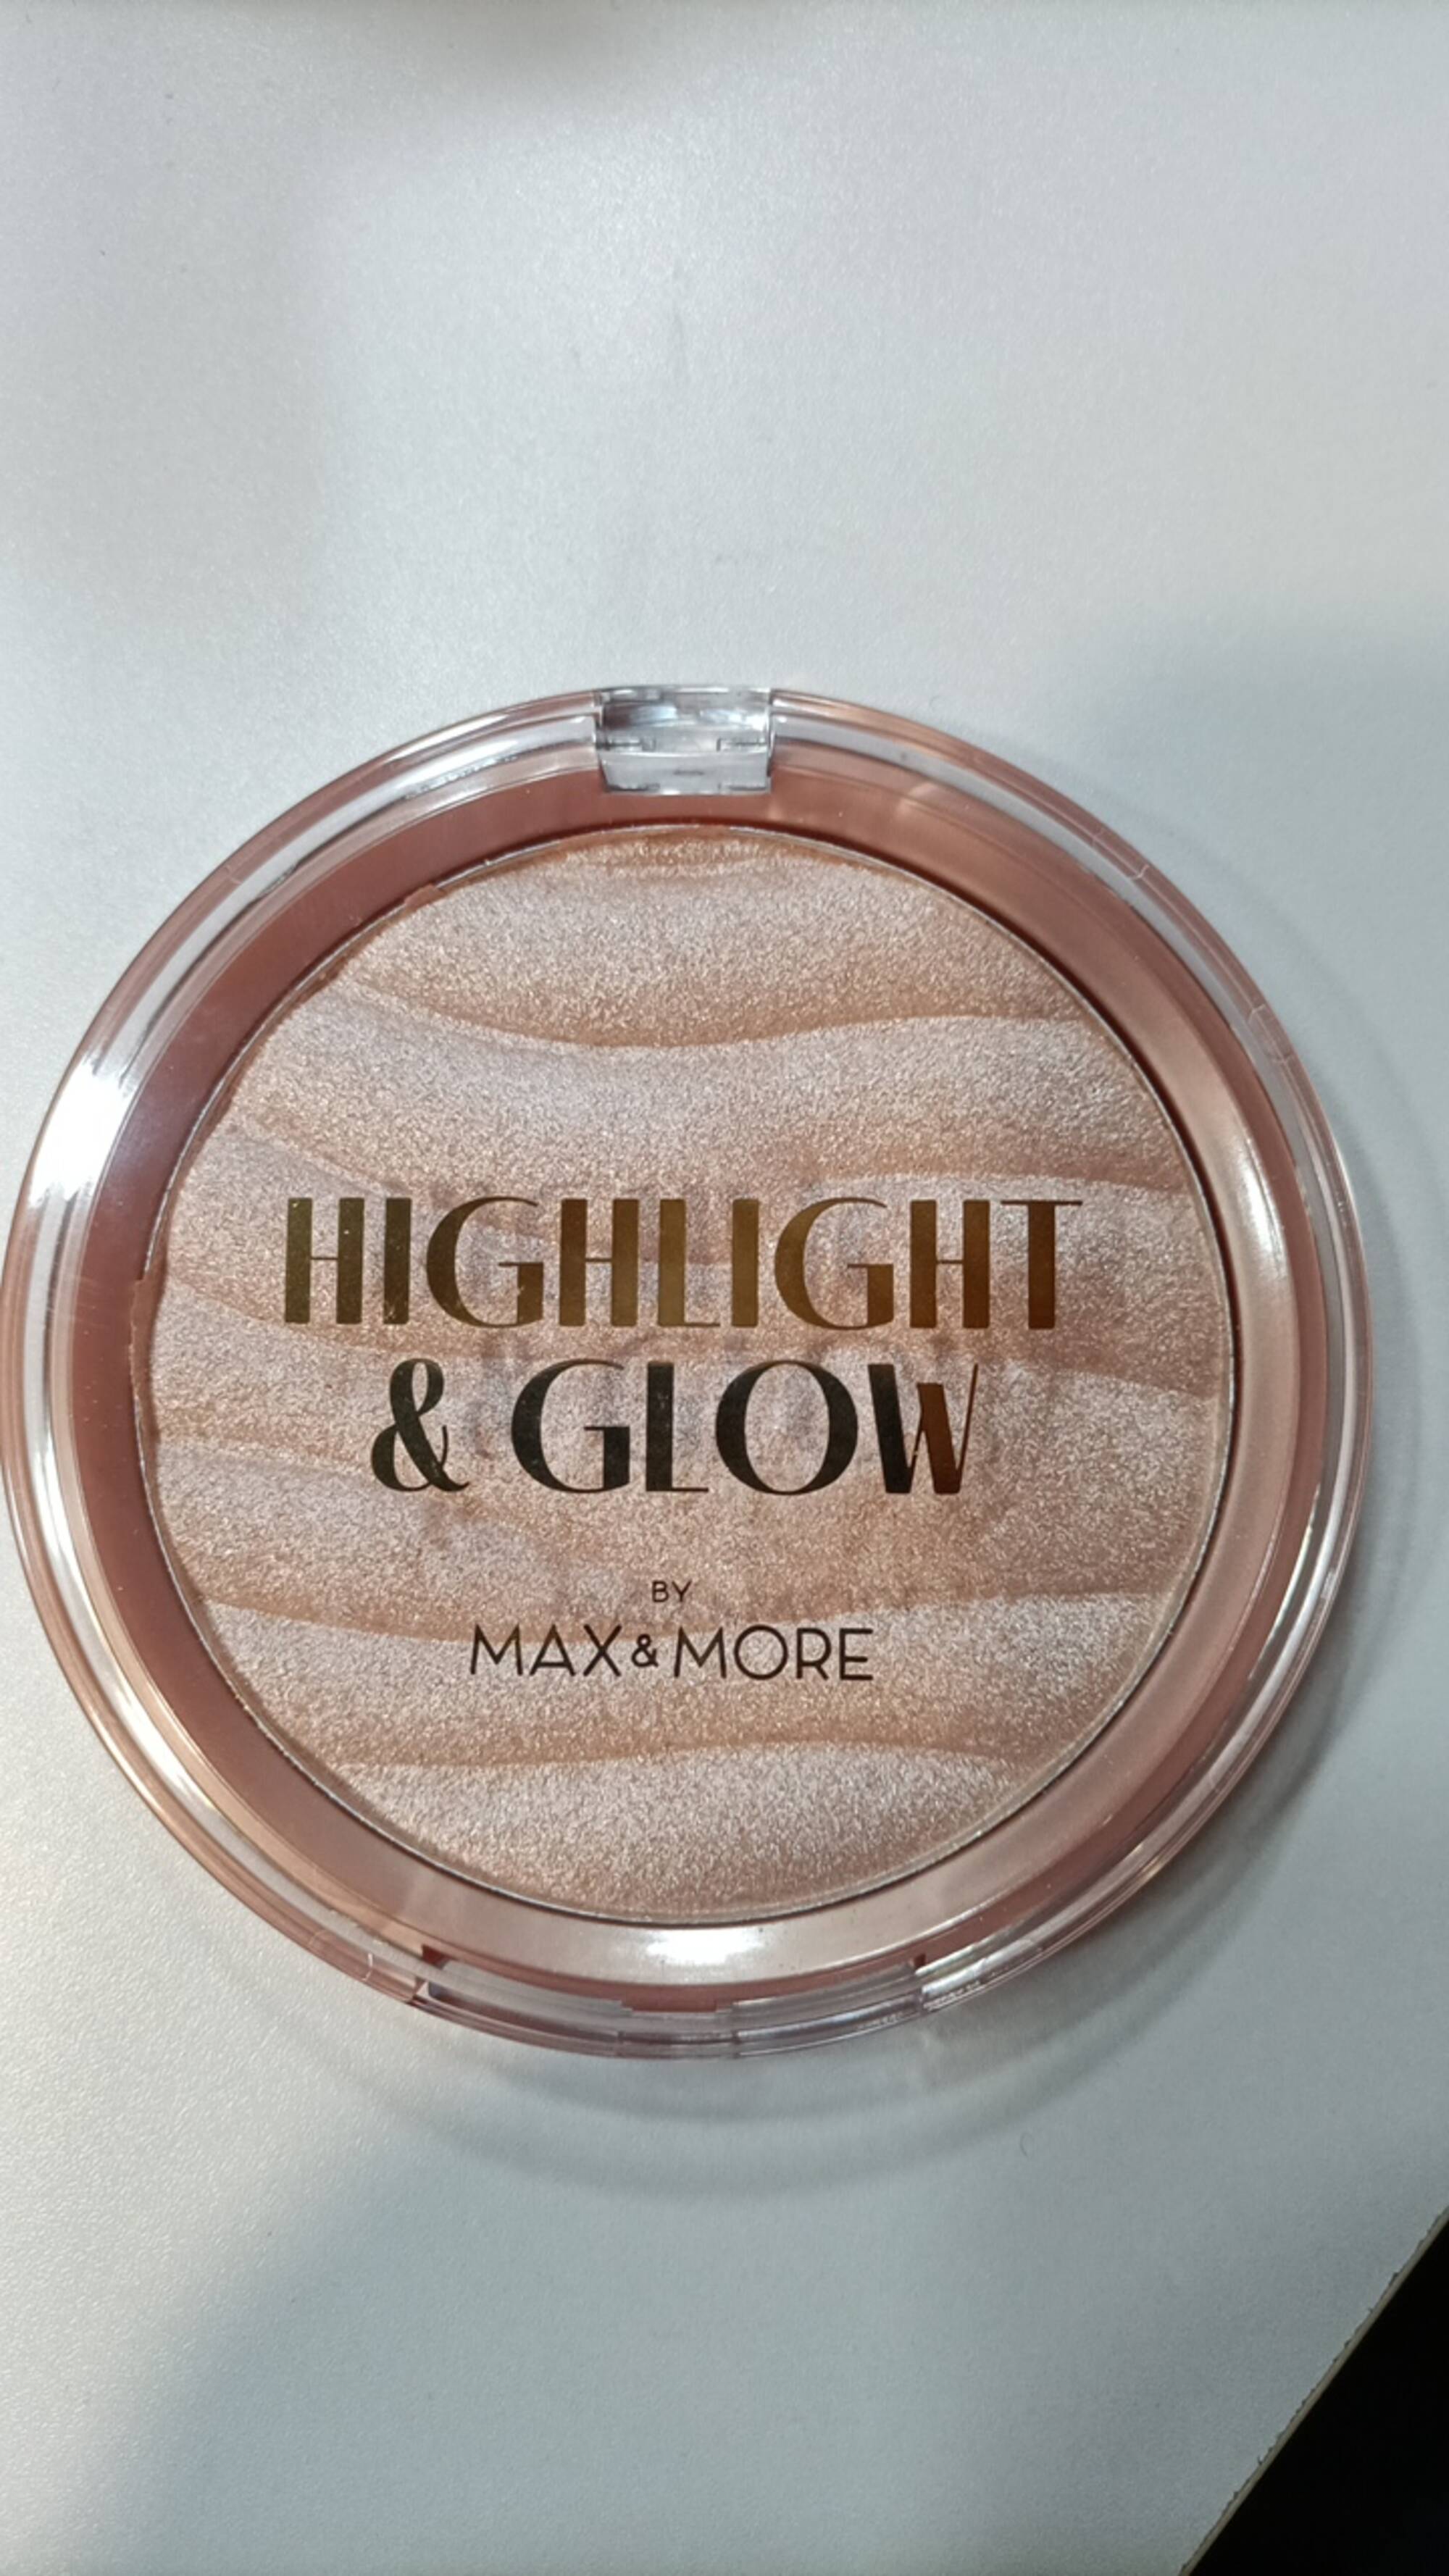 MAX & MORE - Highlight & glow - Face & body highlighter